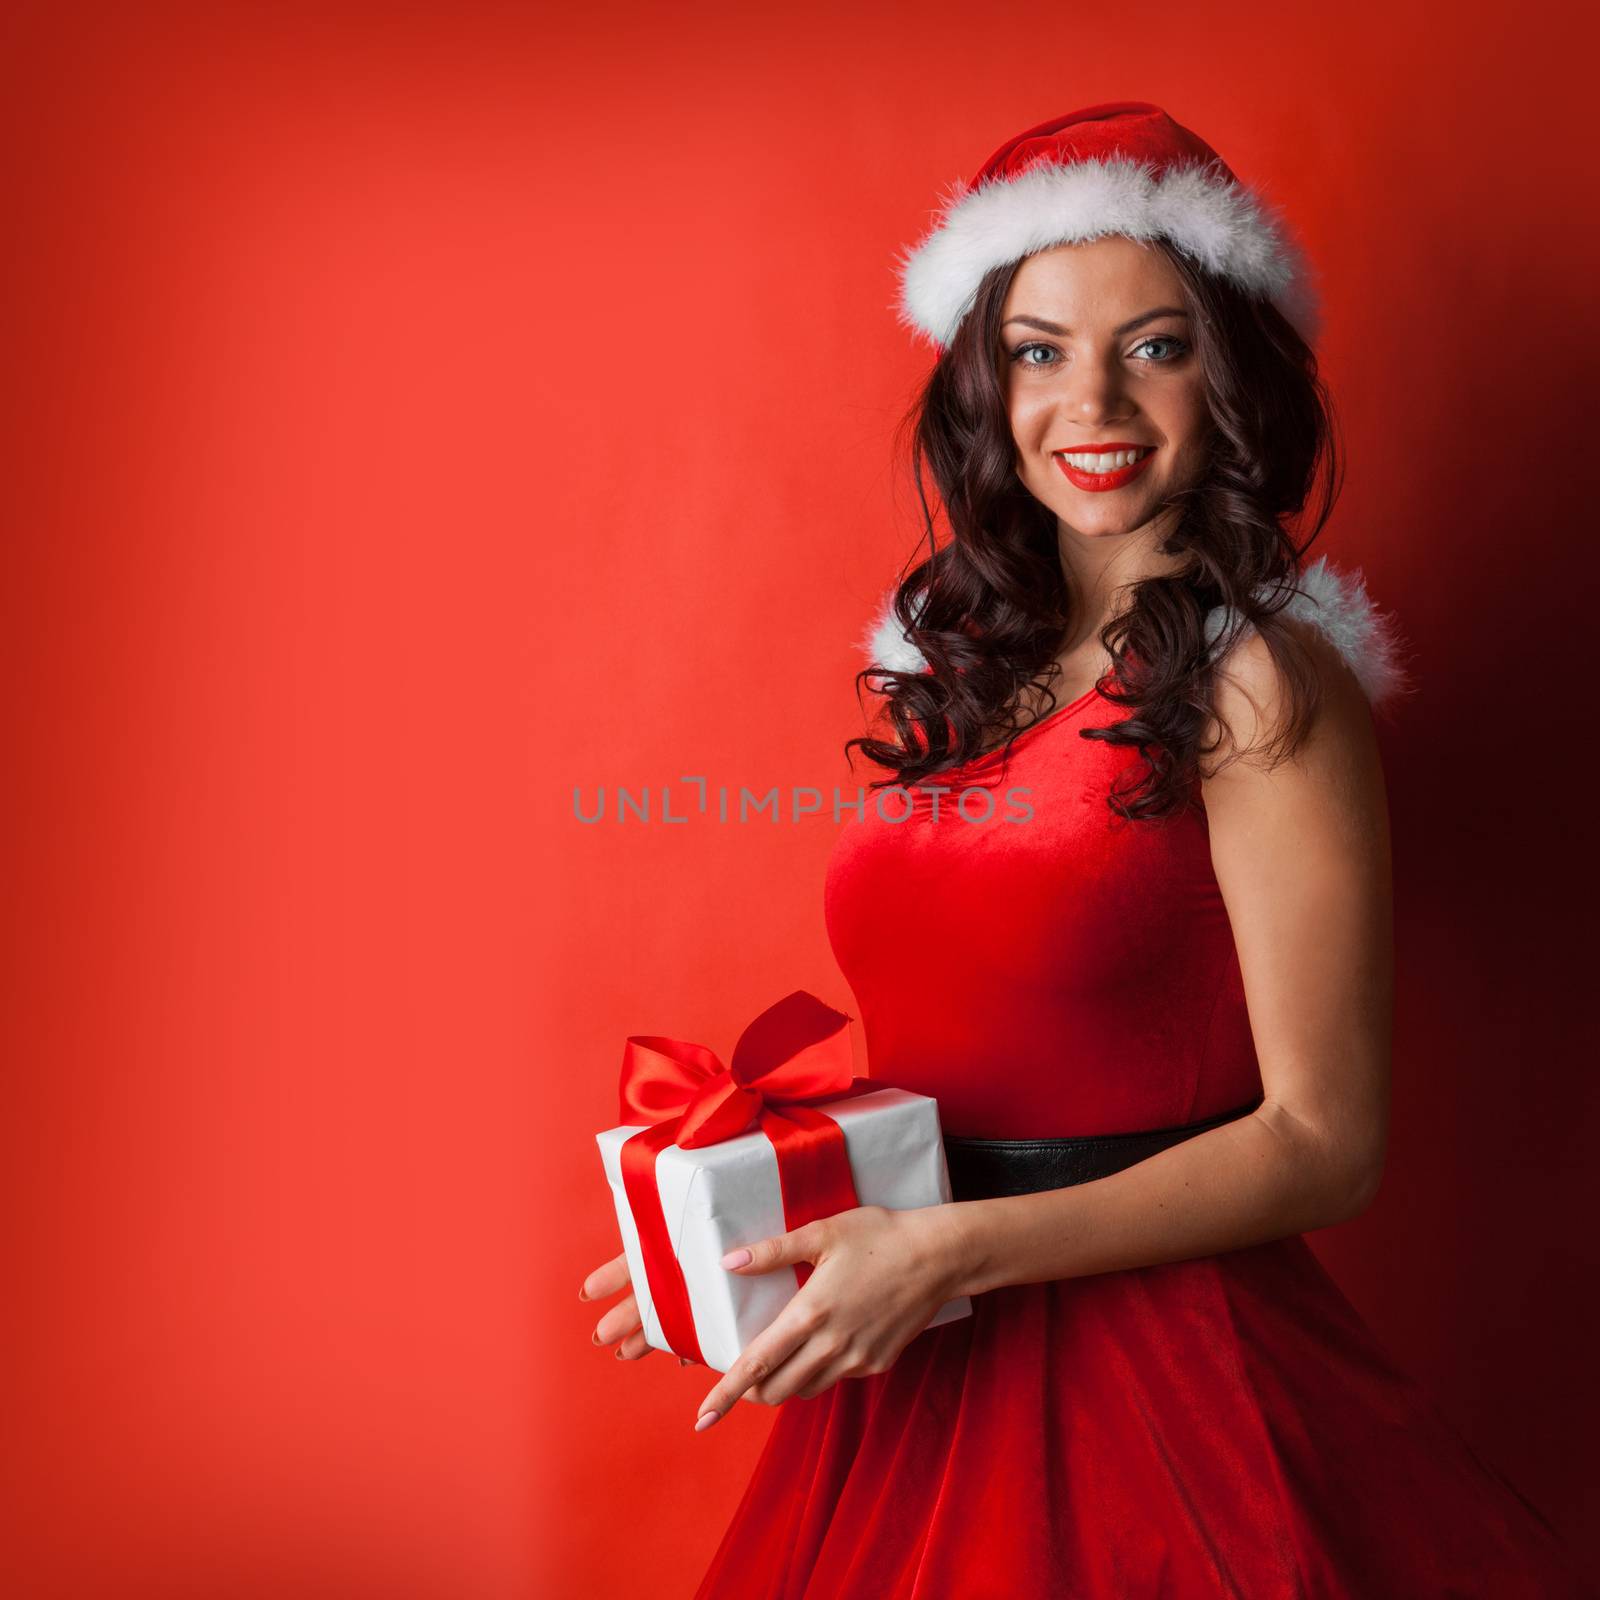 Beautiful young woman in Santa dress and hat celebrating Christmas holding gift box